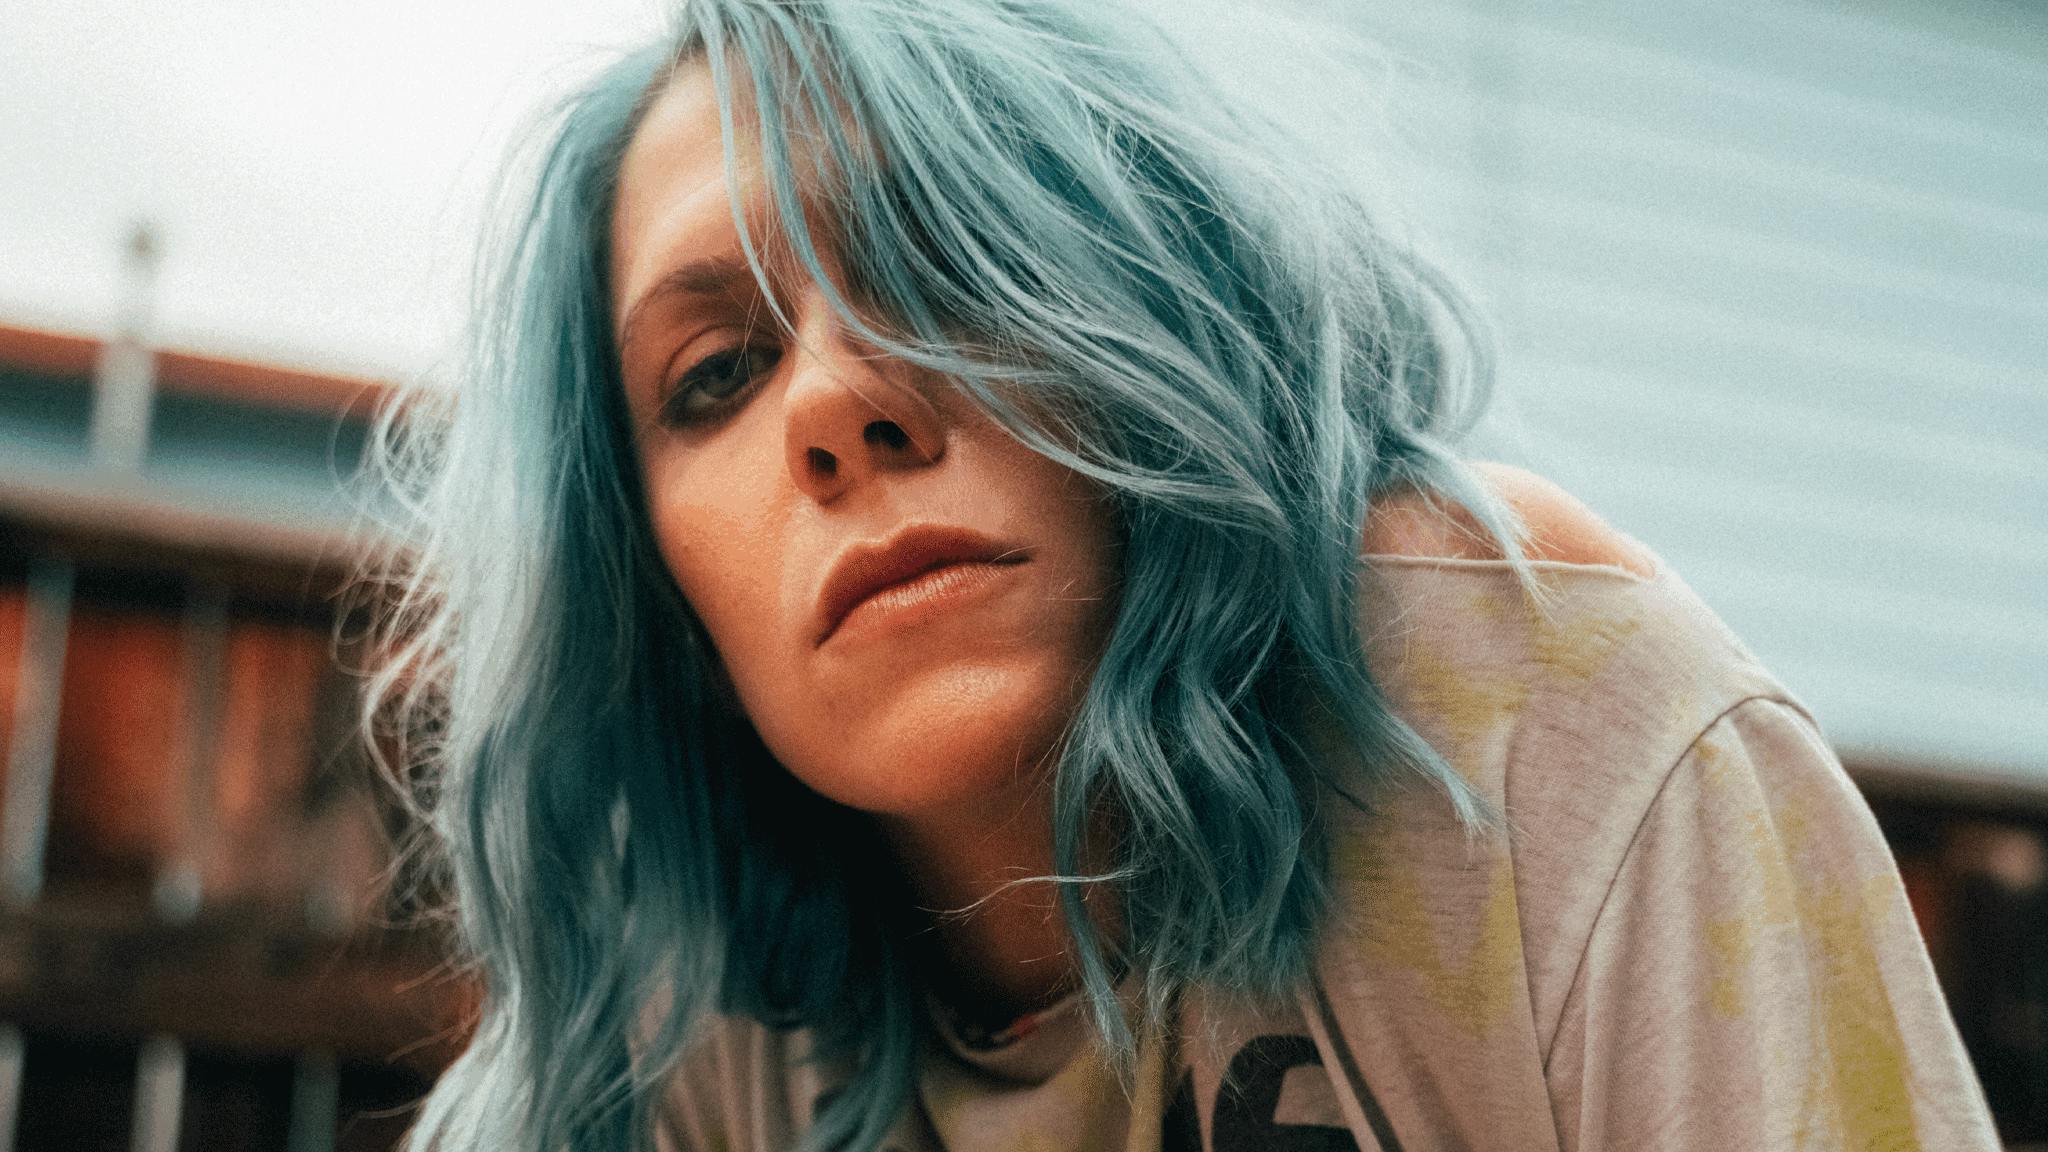 K.Flay drops feel-good single and video, It’s Been So Long